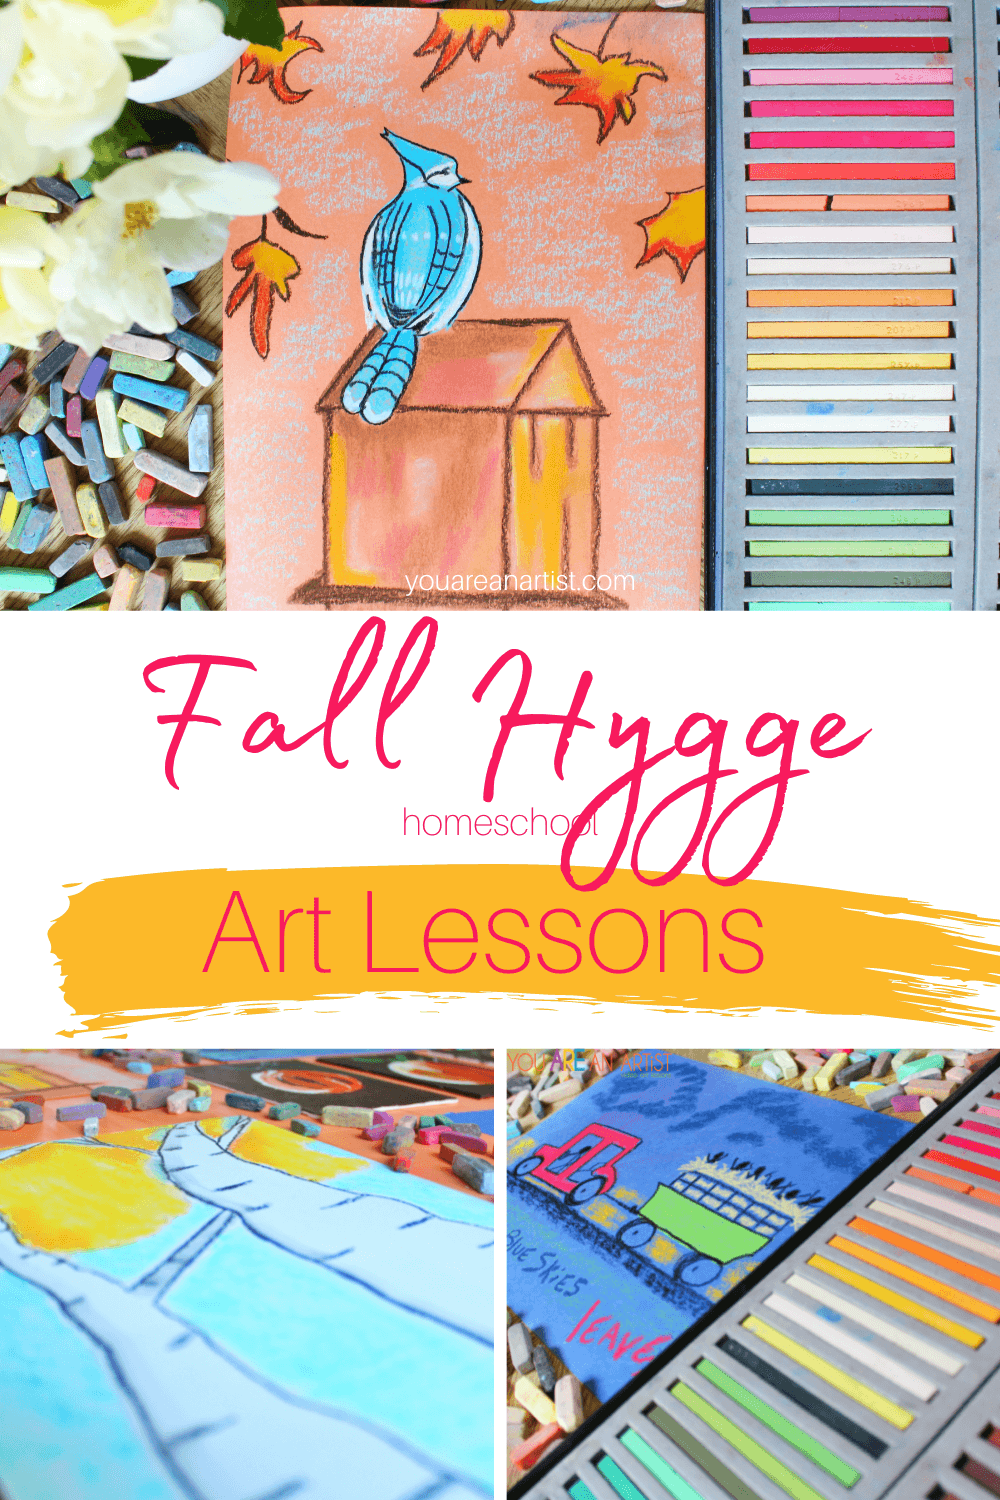 Fall Hygge Homeschool Art Lessons:Here are some super simple ideas on ways to create a fall hygge homeschool art lesson with items you may already have on hand or within easy reach. #fall #fallhygge #chalkpastels #homeschool #homeschoolartlessons 